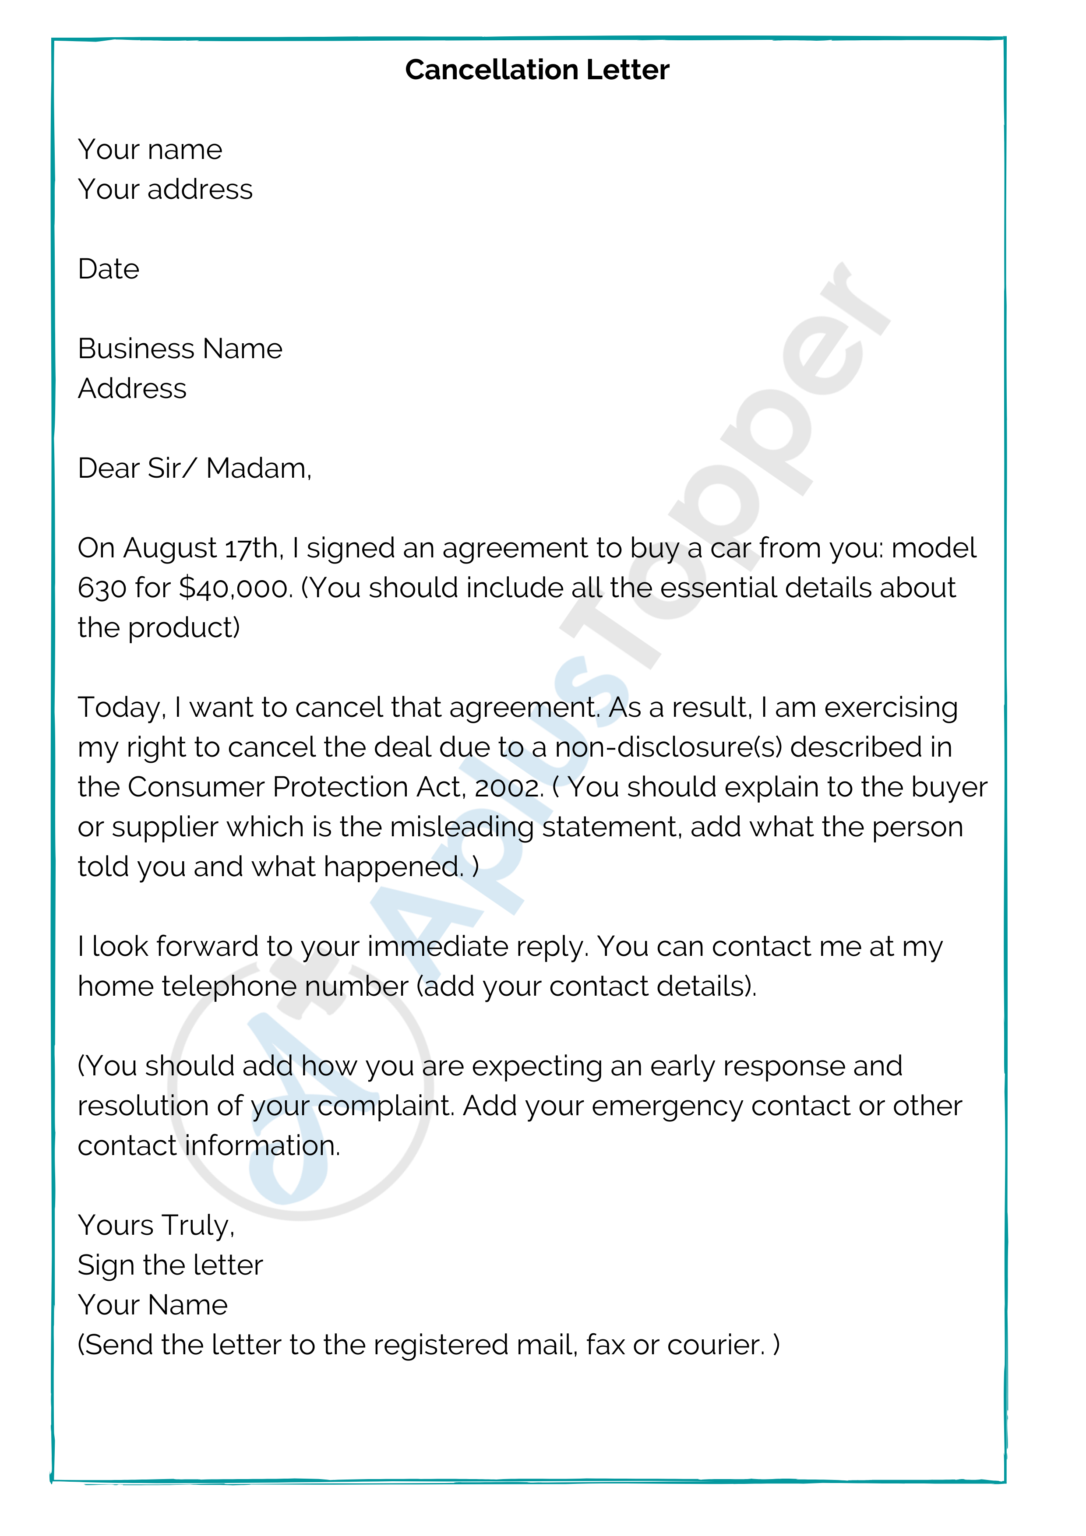 Sample Cancellation Letters | Format, Examples and How To Write? - A